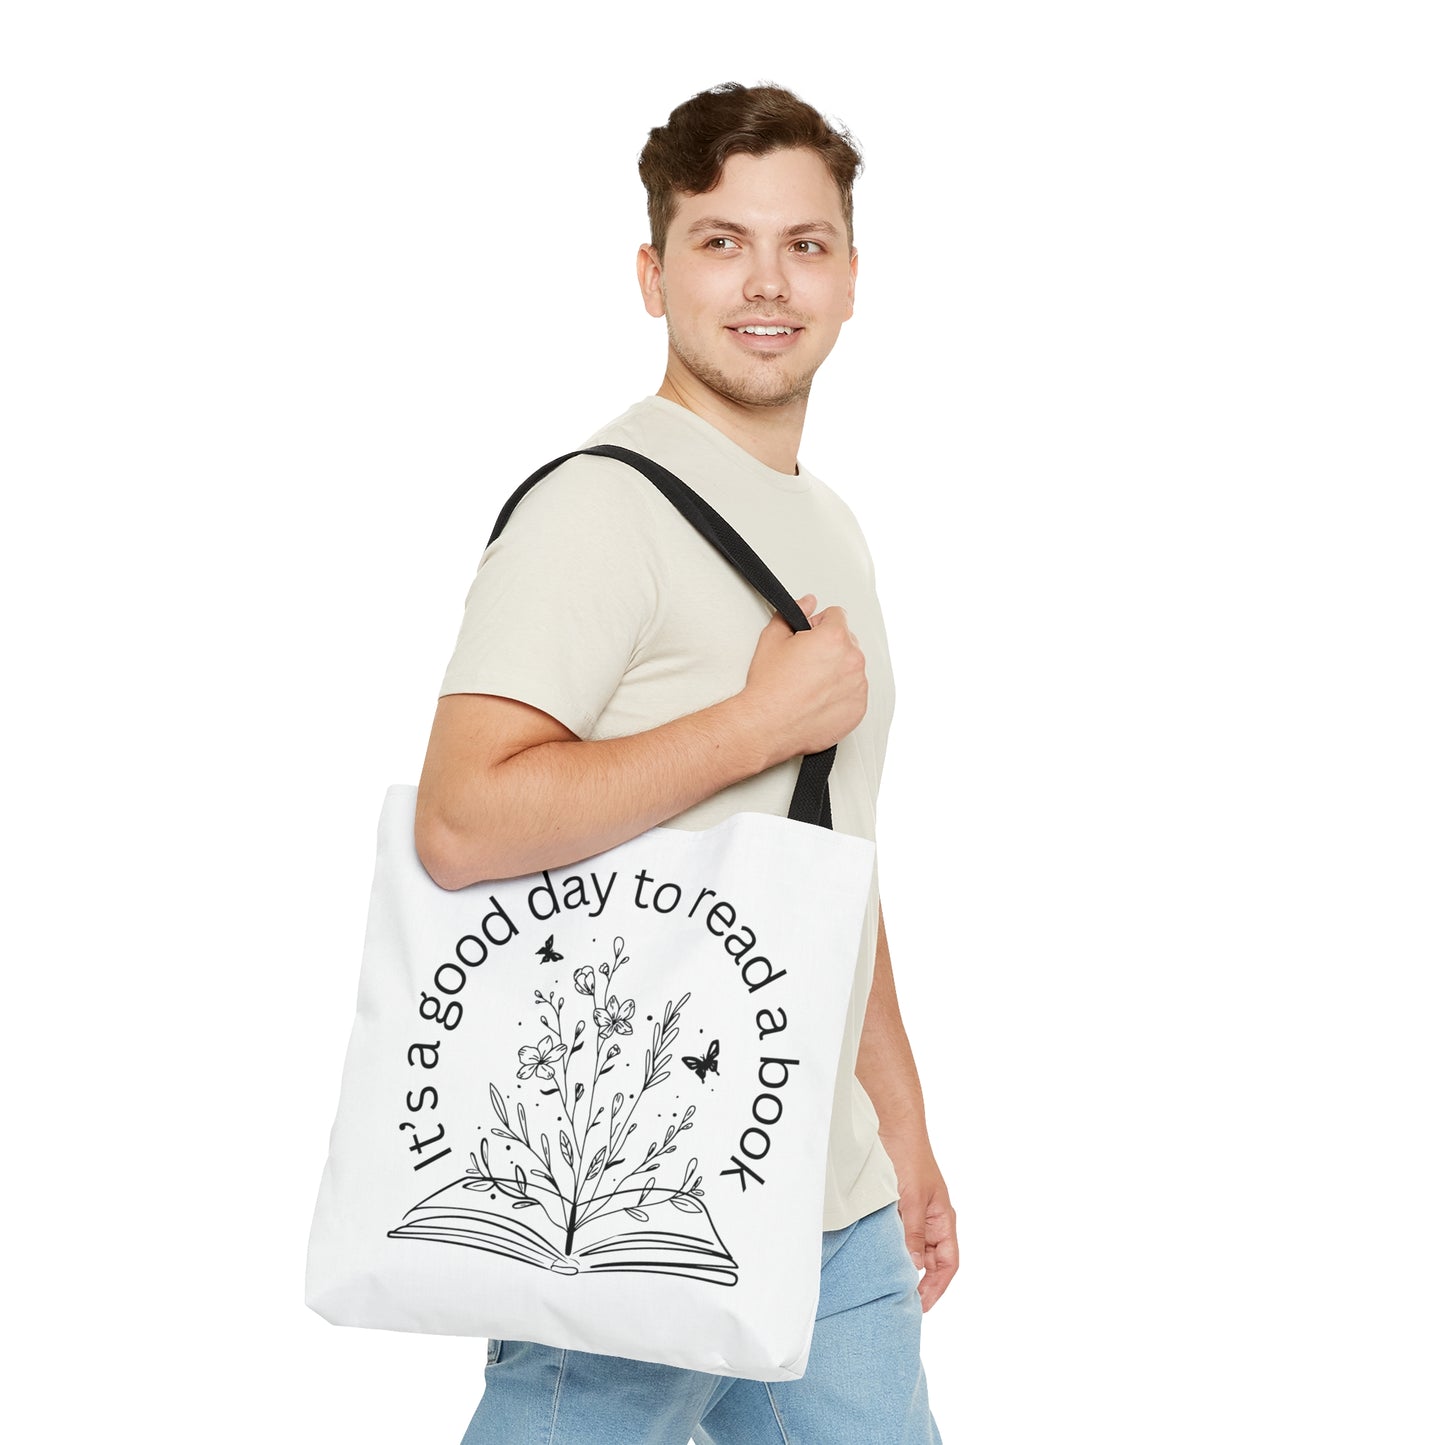 It's a Good Day to Read a Book Tote Bag